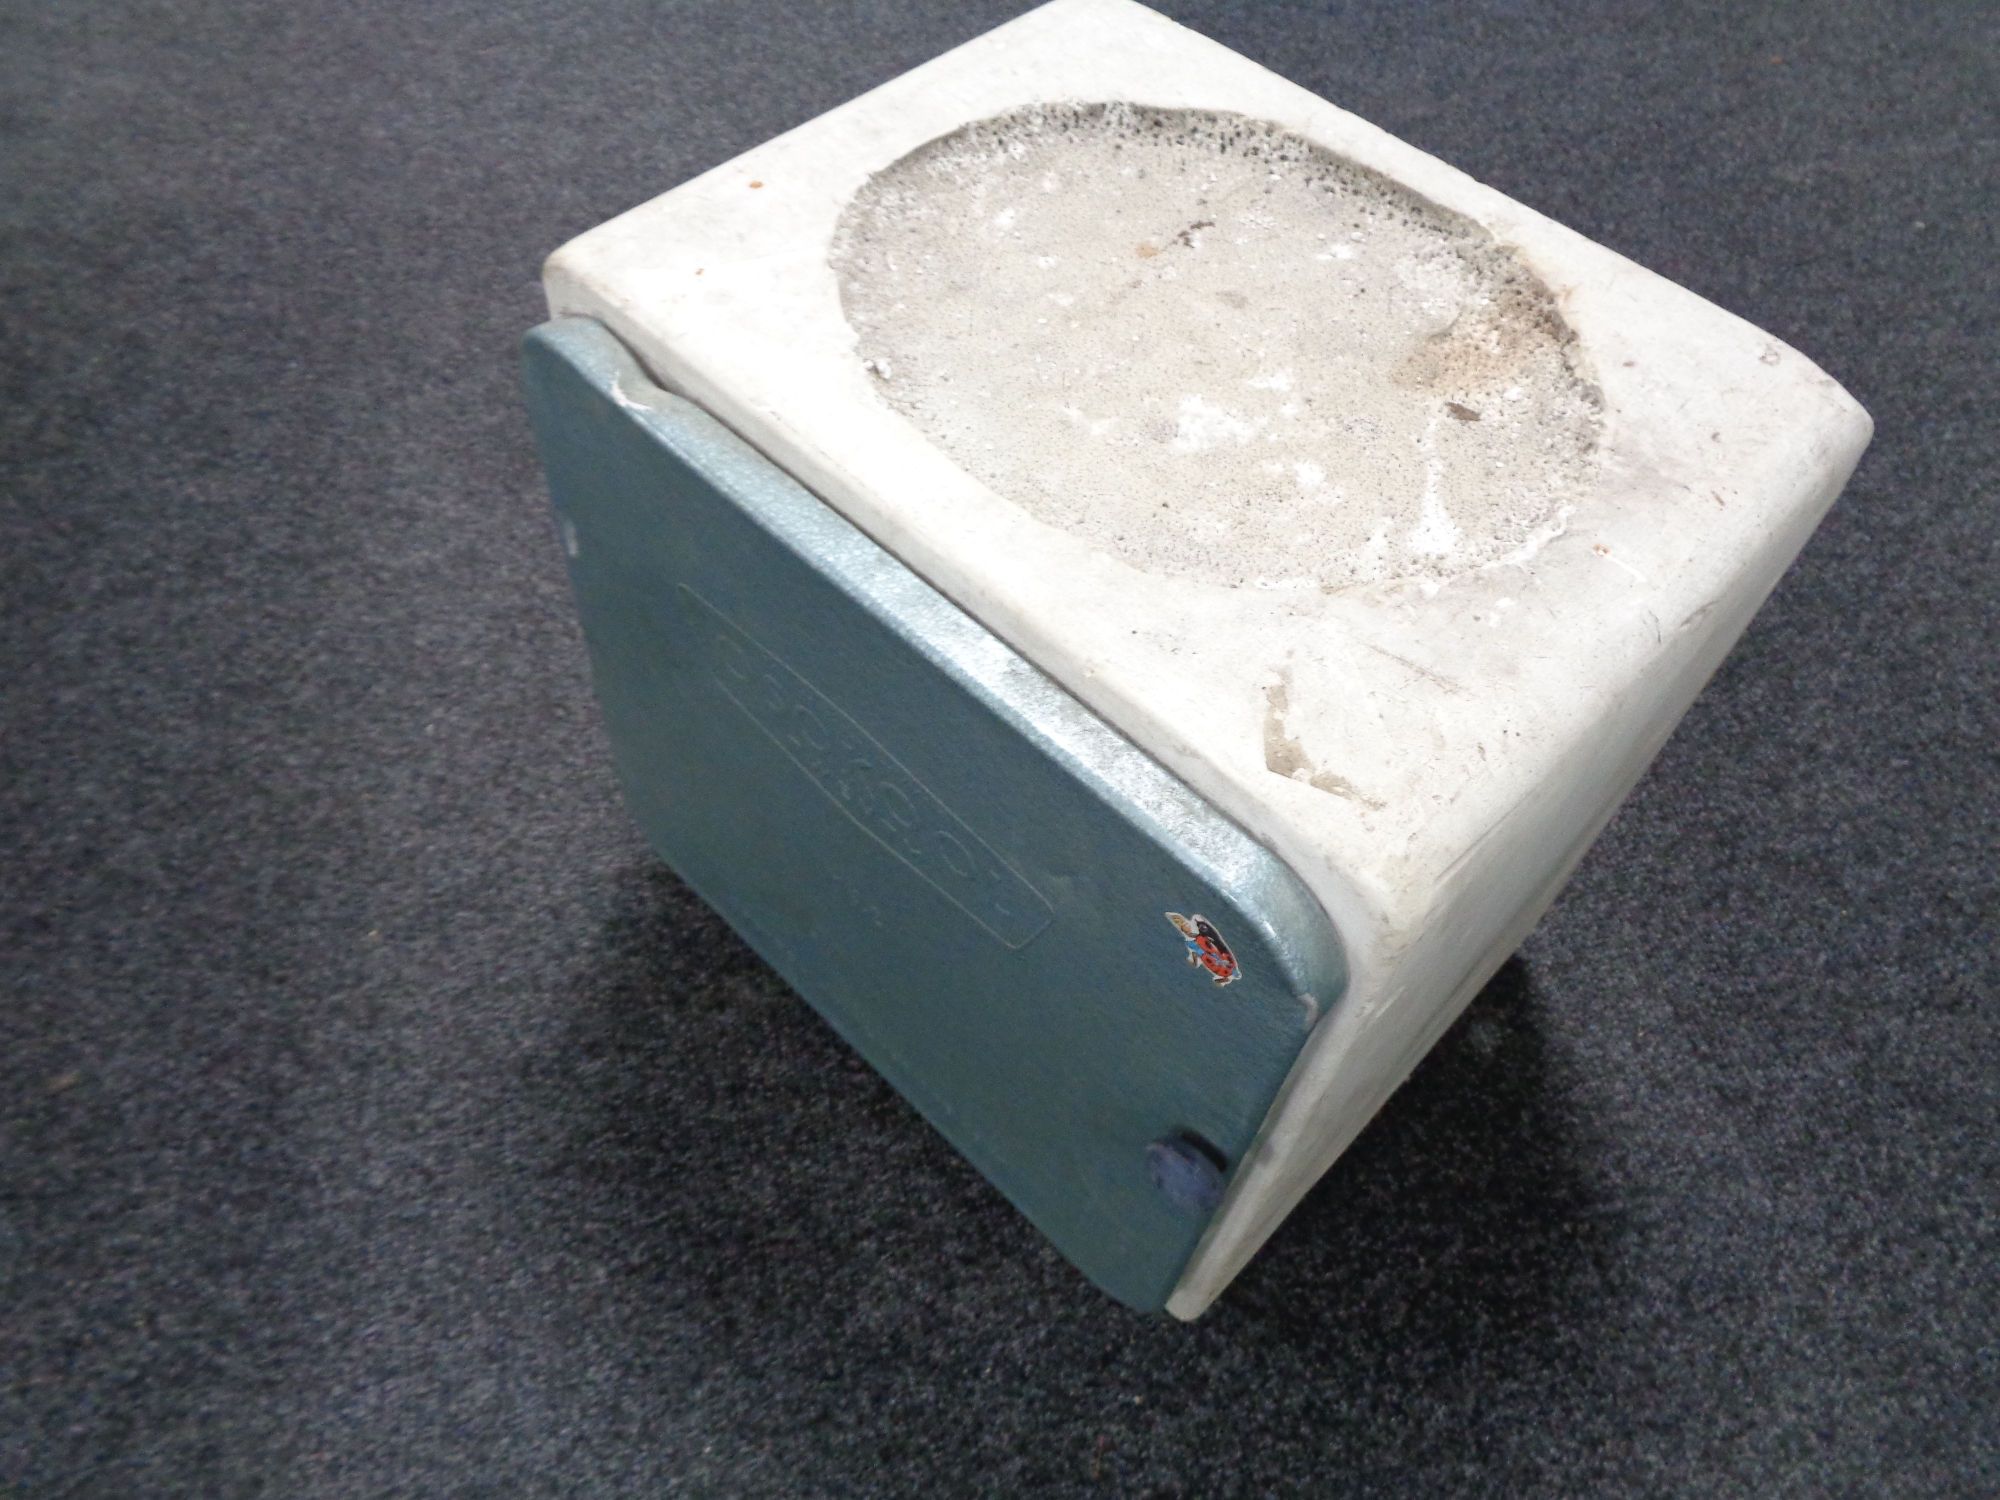 A vintage Osokool Twenty fridge together with two boxes containing camping stoves, wire metal racks, - Image 2 of 2